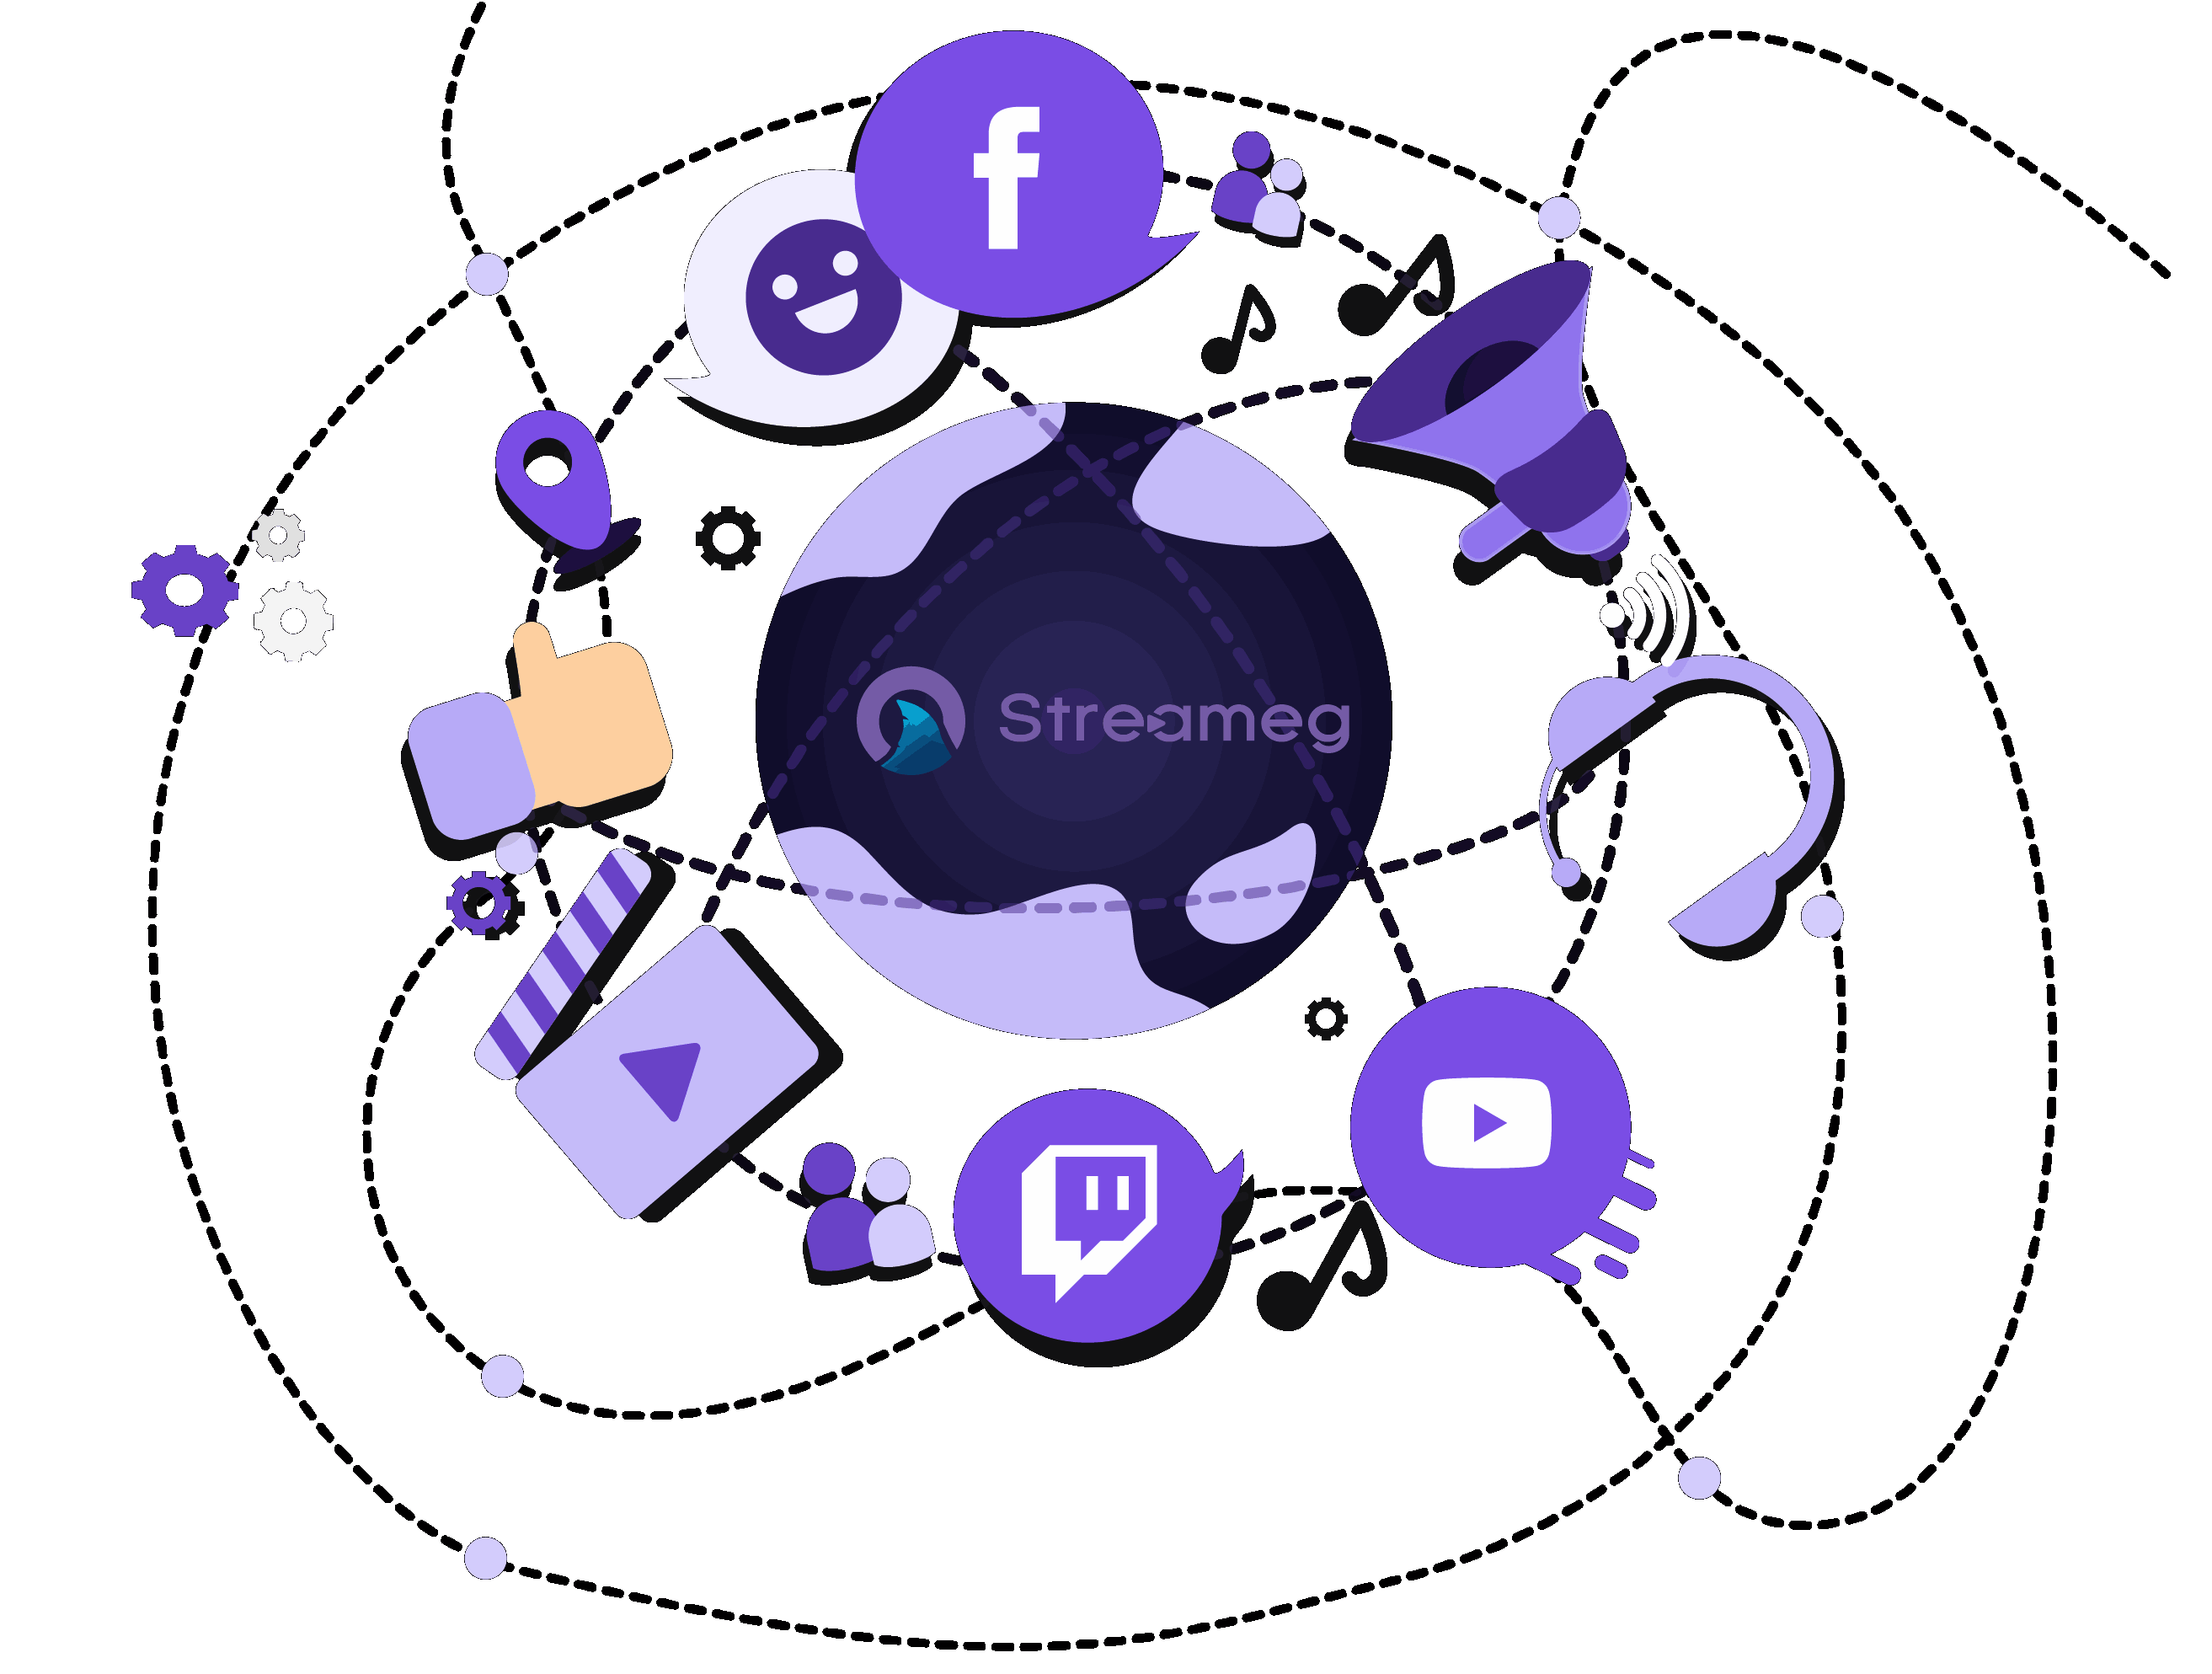 Discover the boundless possibilities of live streaming with Streameg - your gateway to a smarter streaming experience